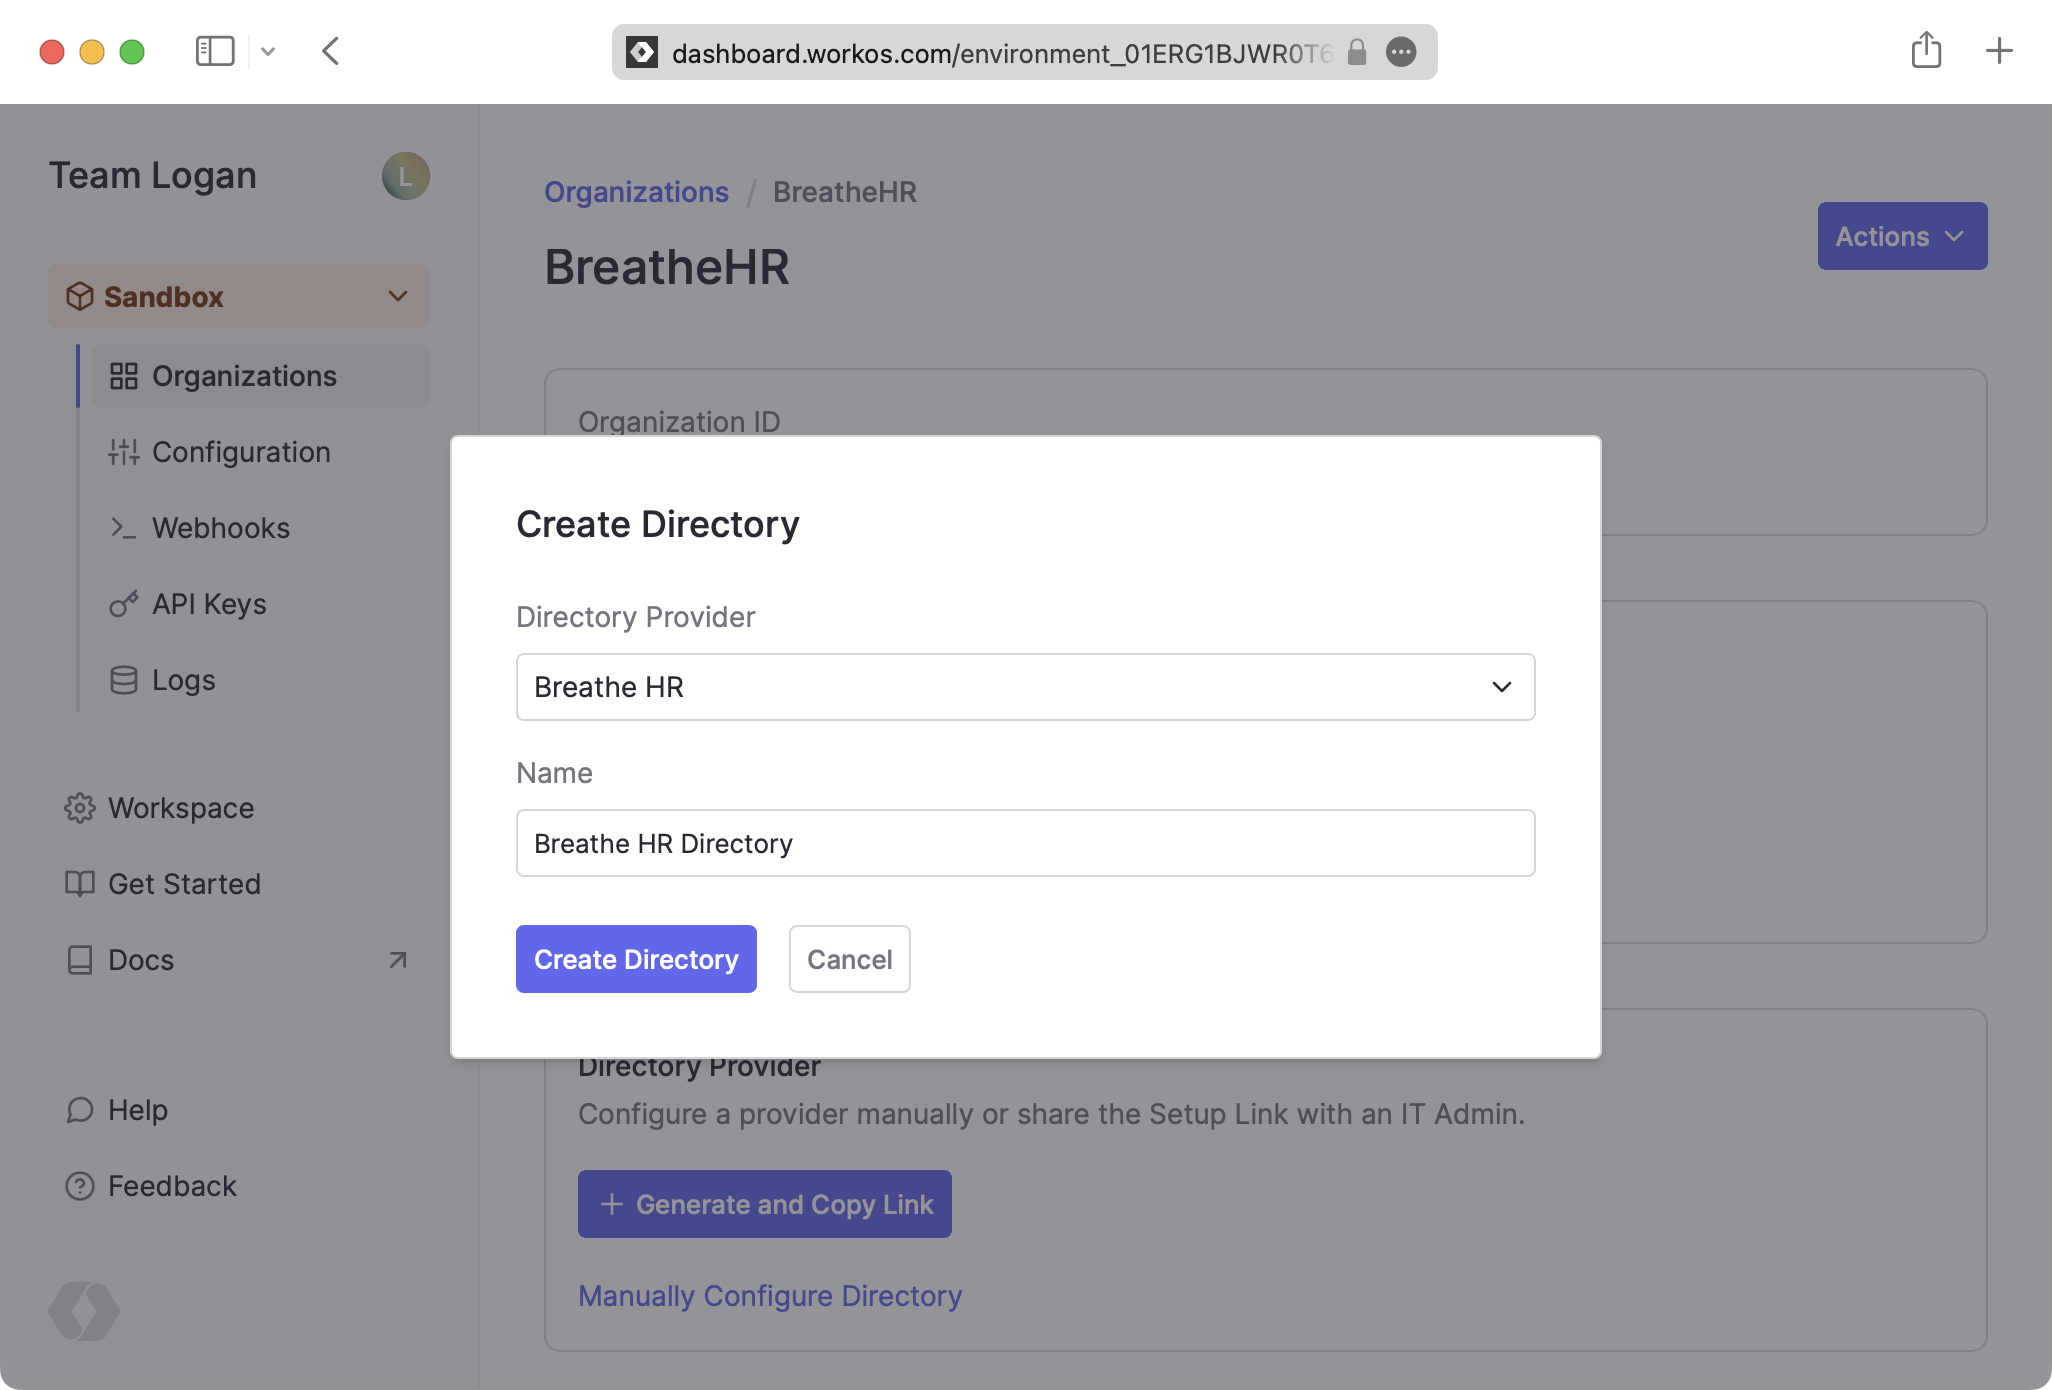 select Breathe HR, provide name, and select Create Directory